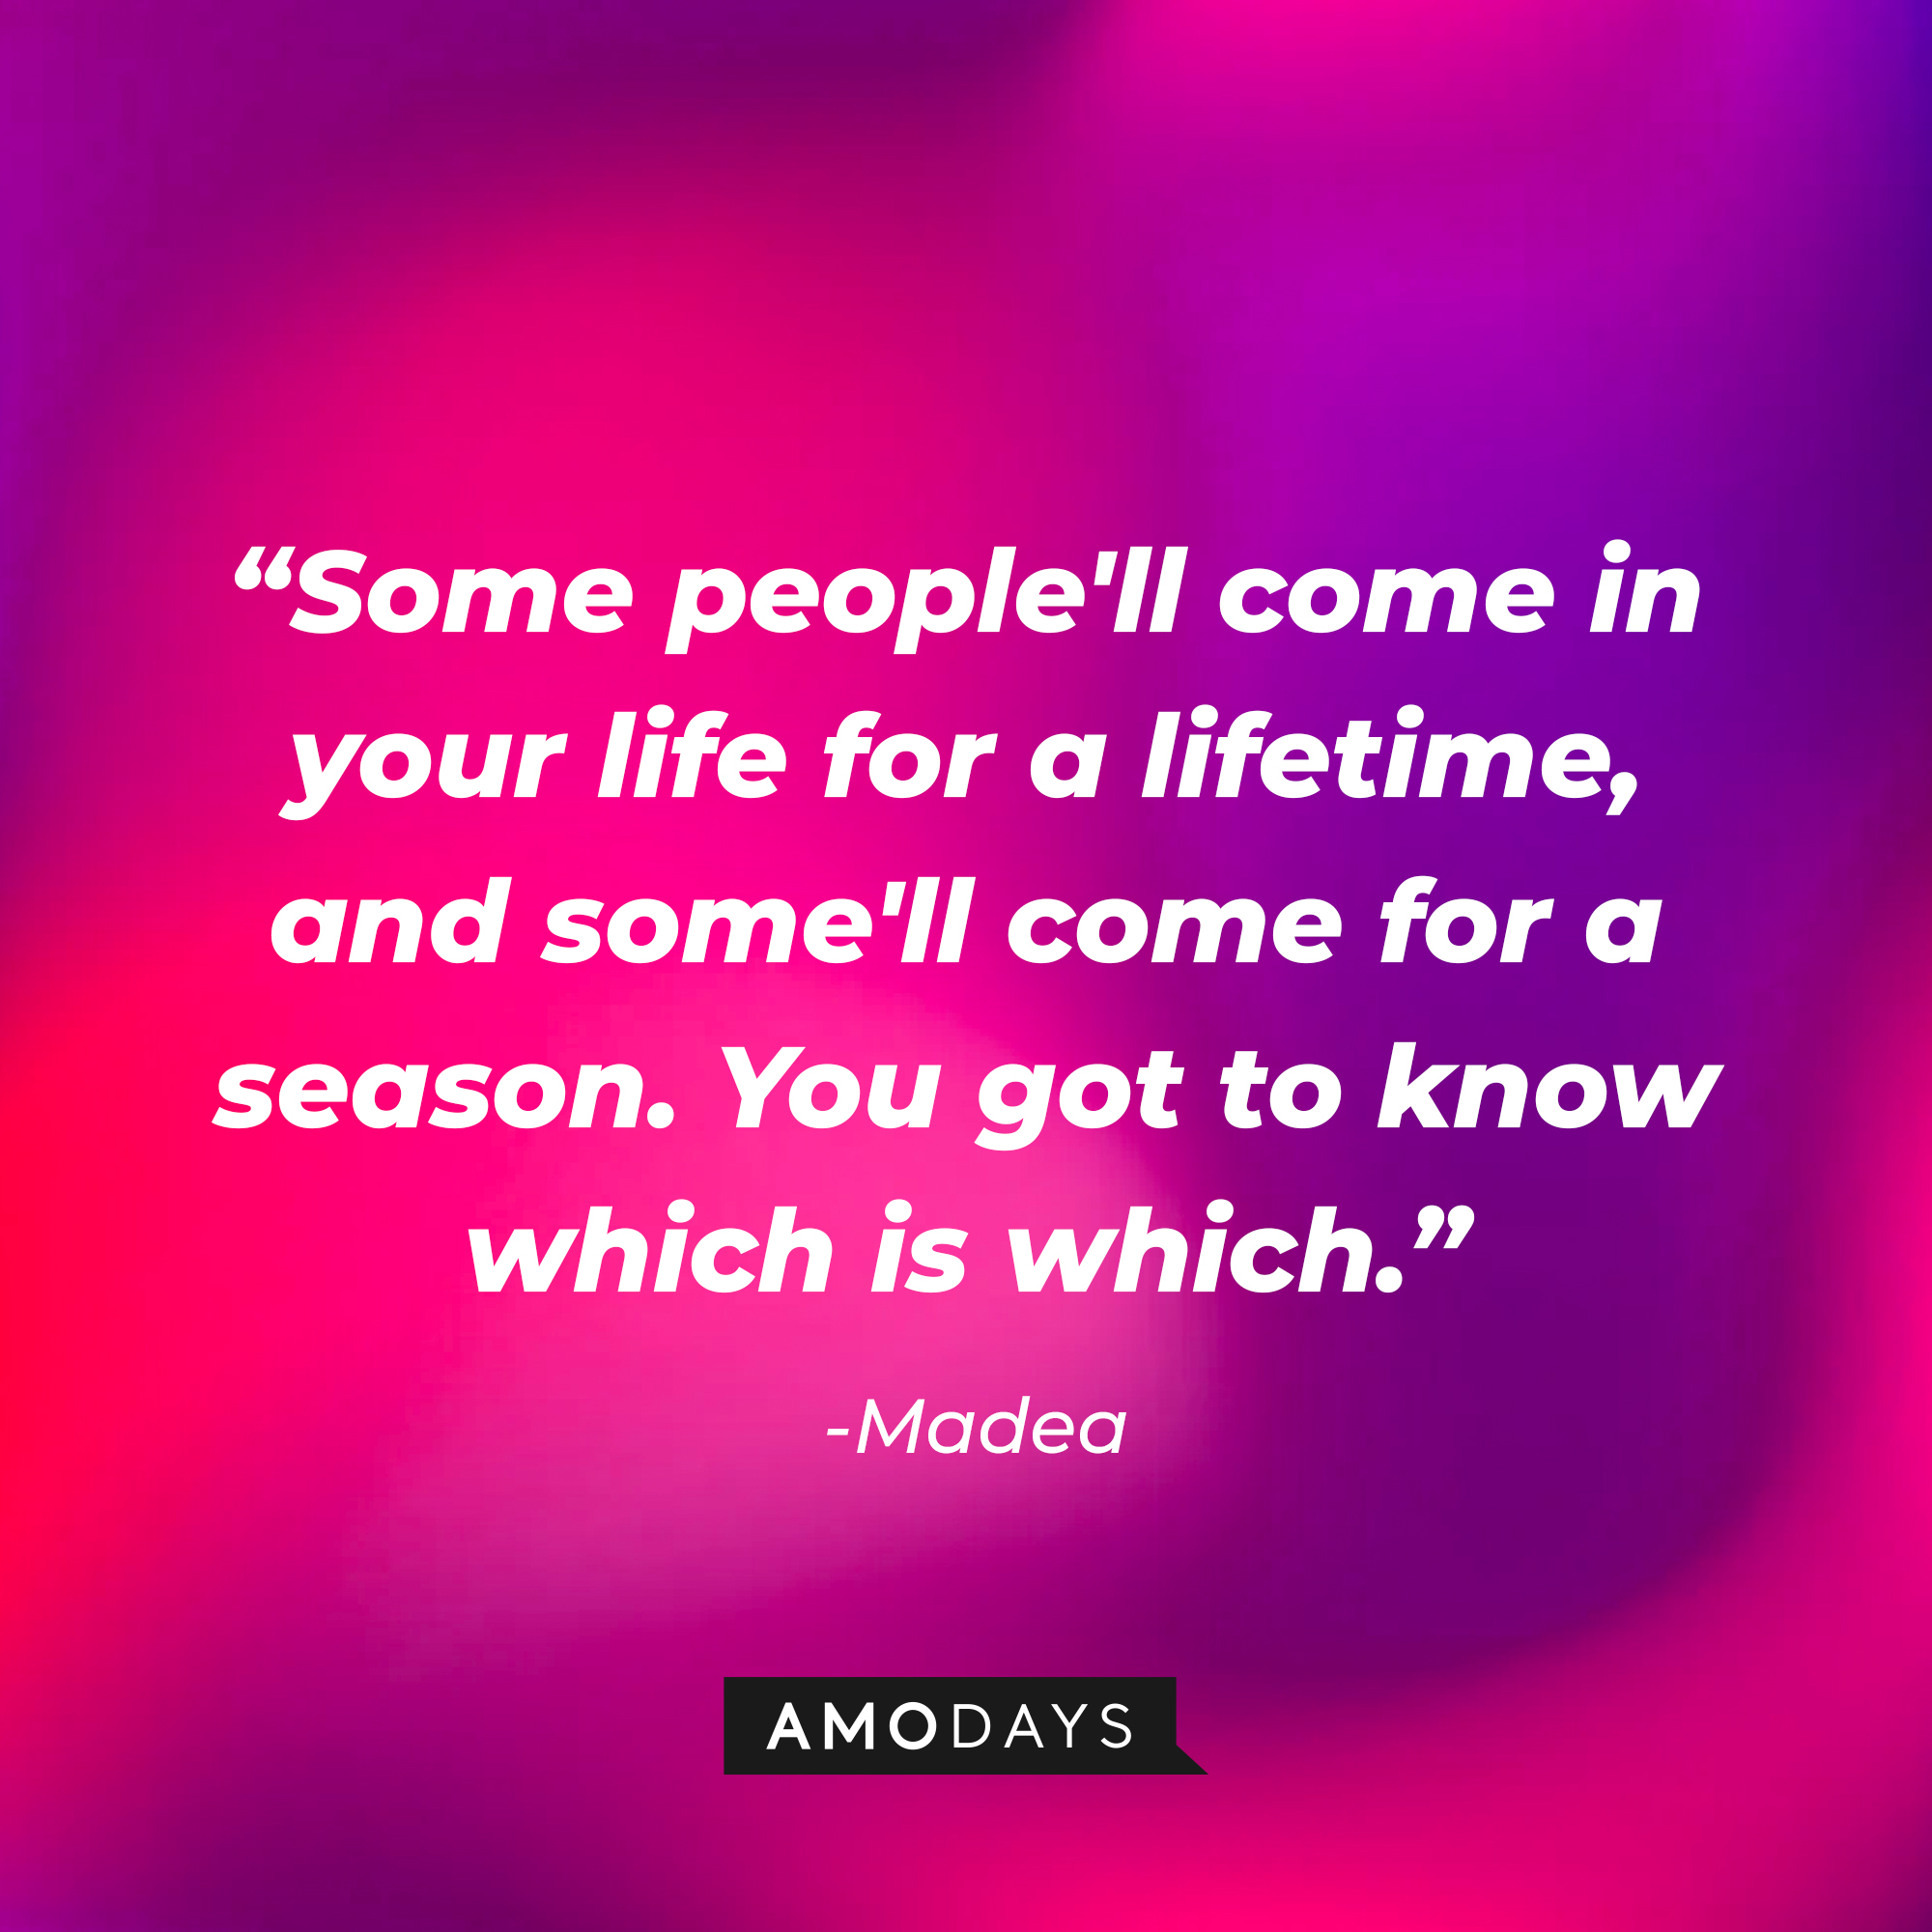 Madea’s quote: "Some people'll come in your life for a lifetime, and some'll come for a season. You got to know which is which.” | Source: AmoDays